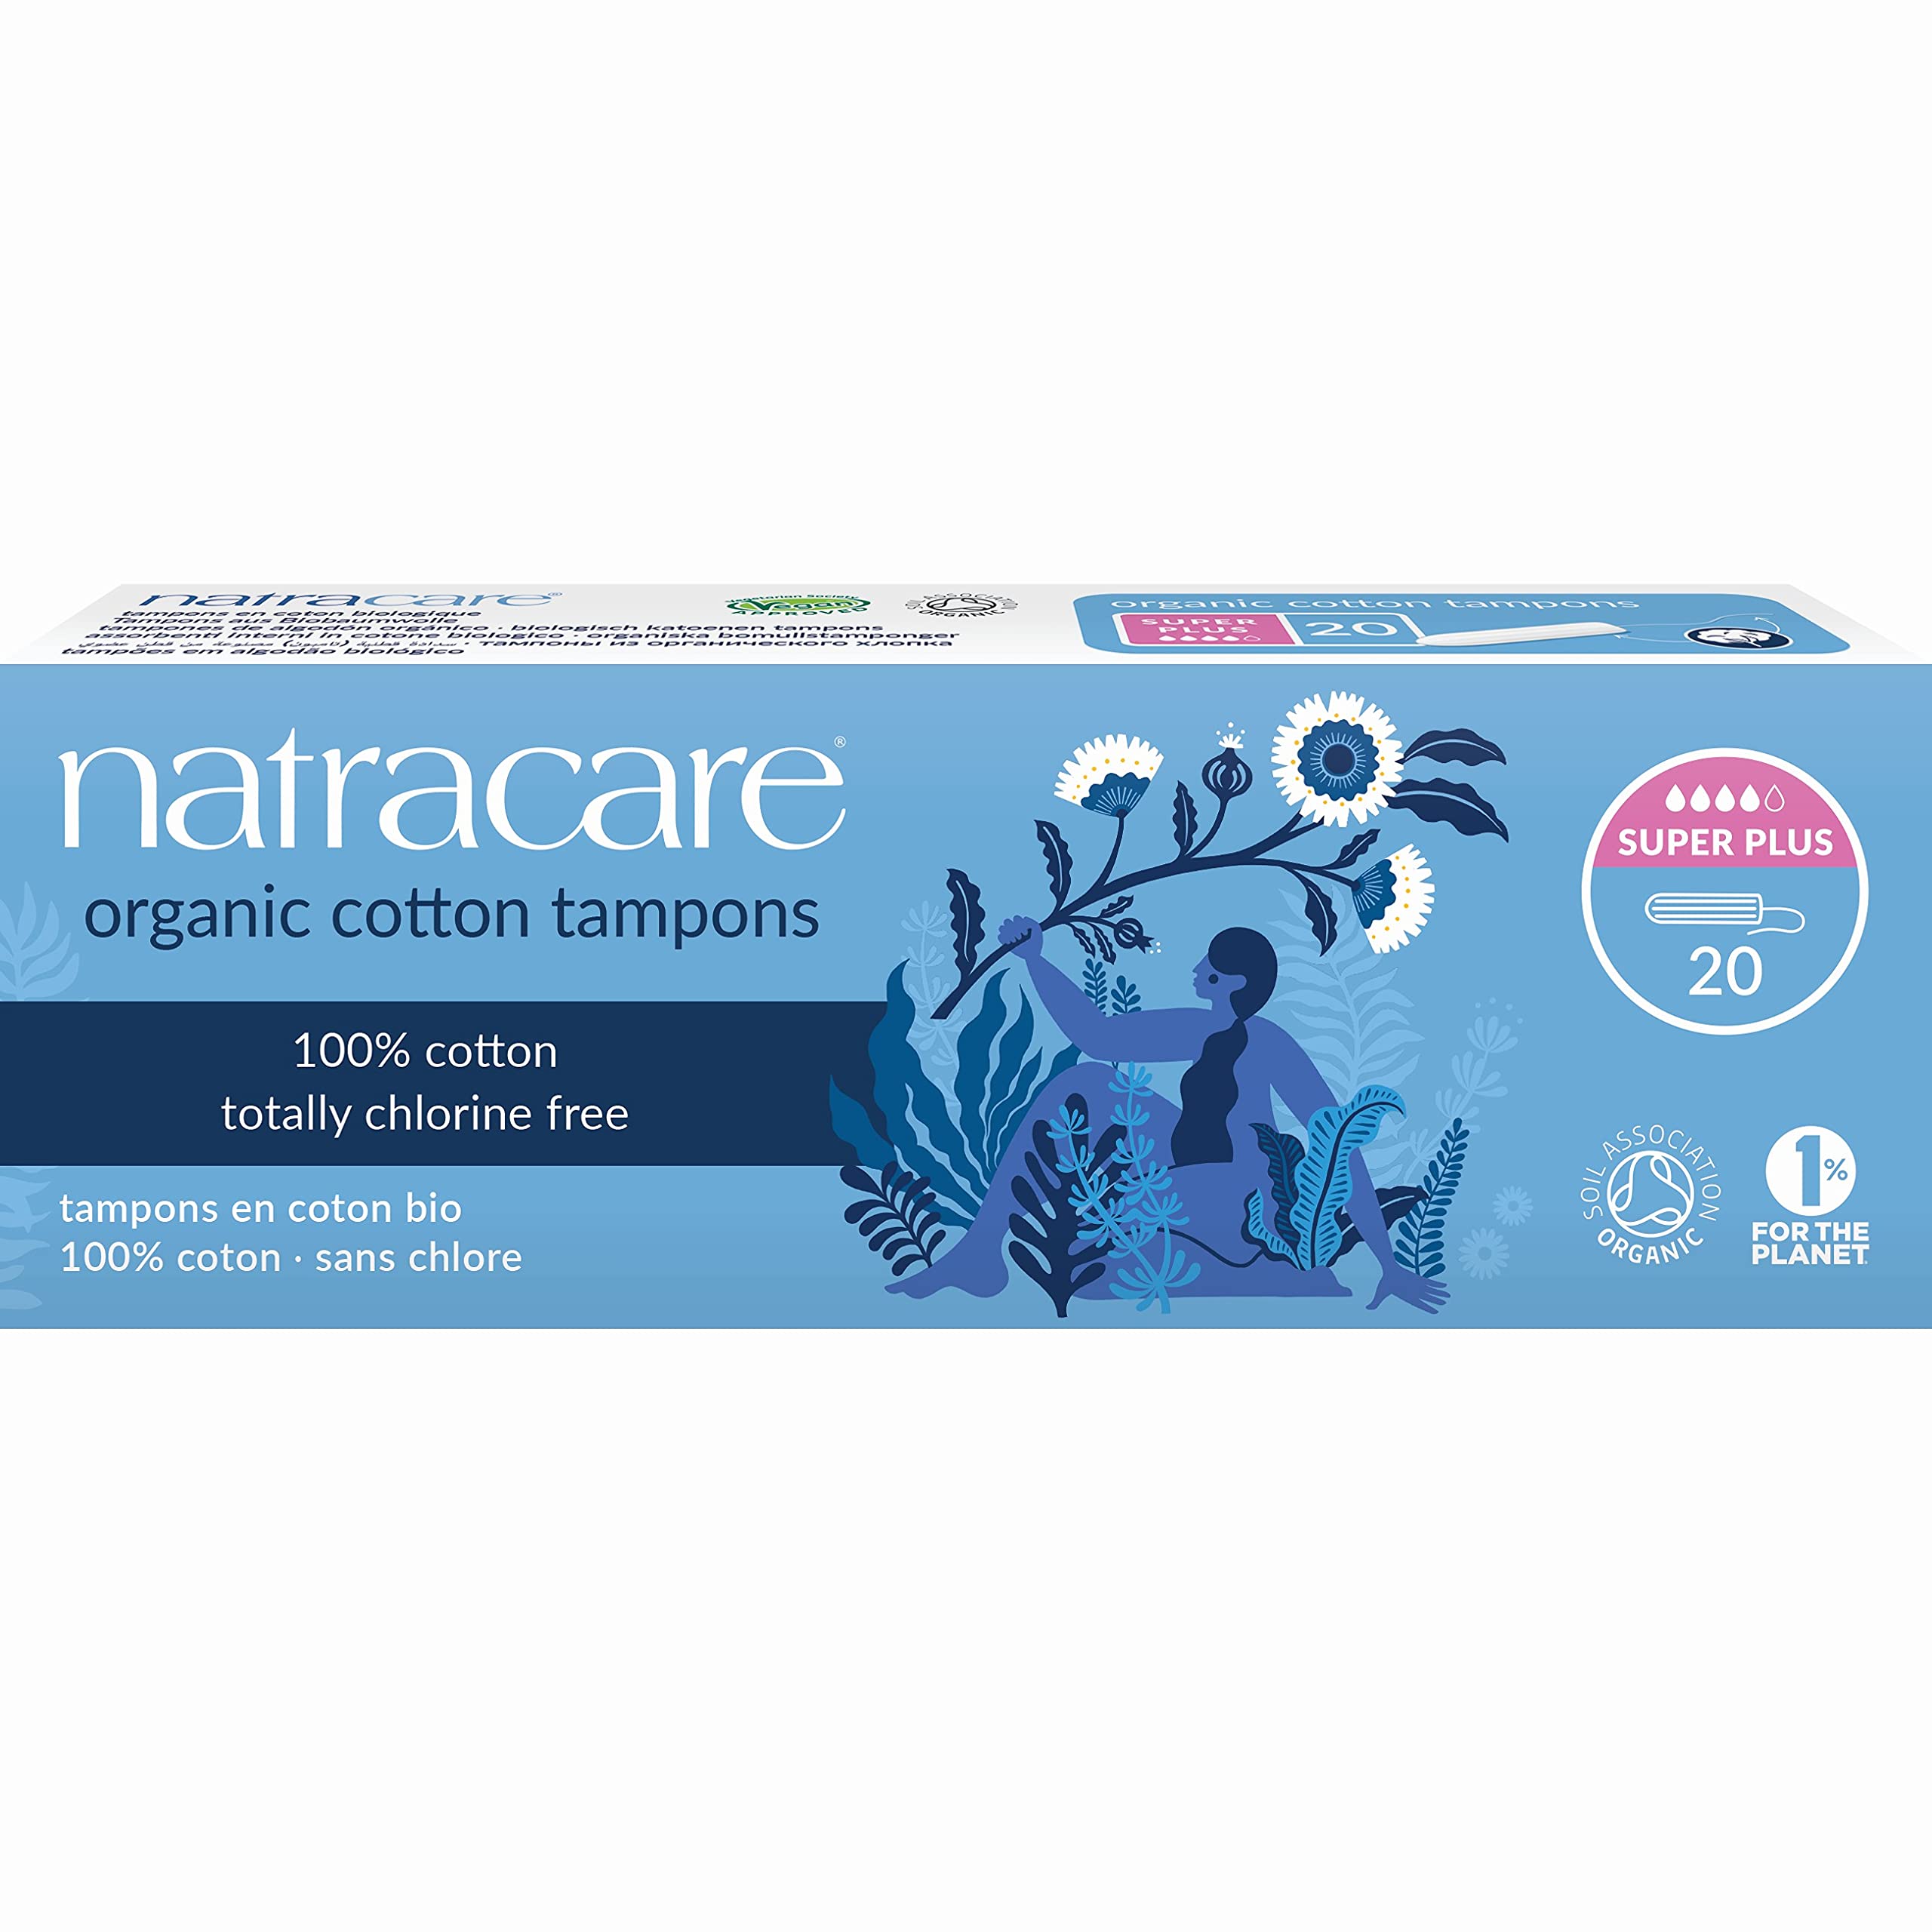 Natracare Non-Applicator Organic Cotton Tampons, Super Plus, 20 Count (Pack of 12)